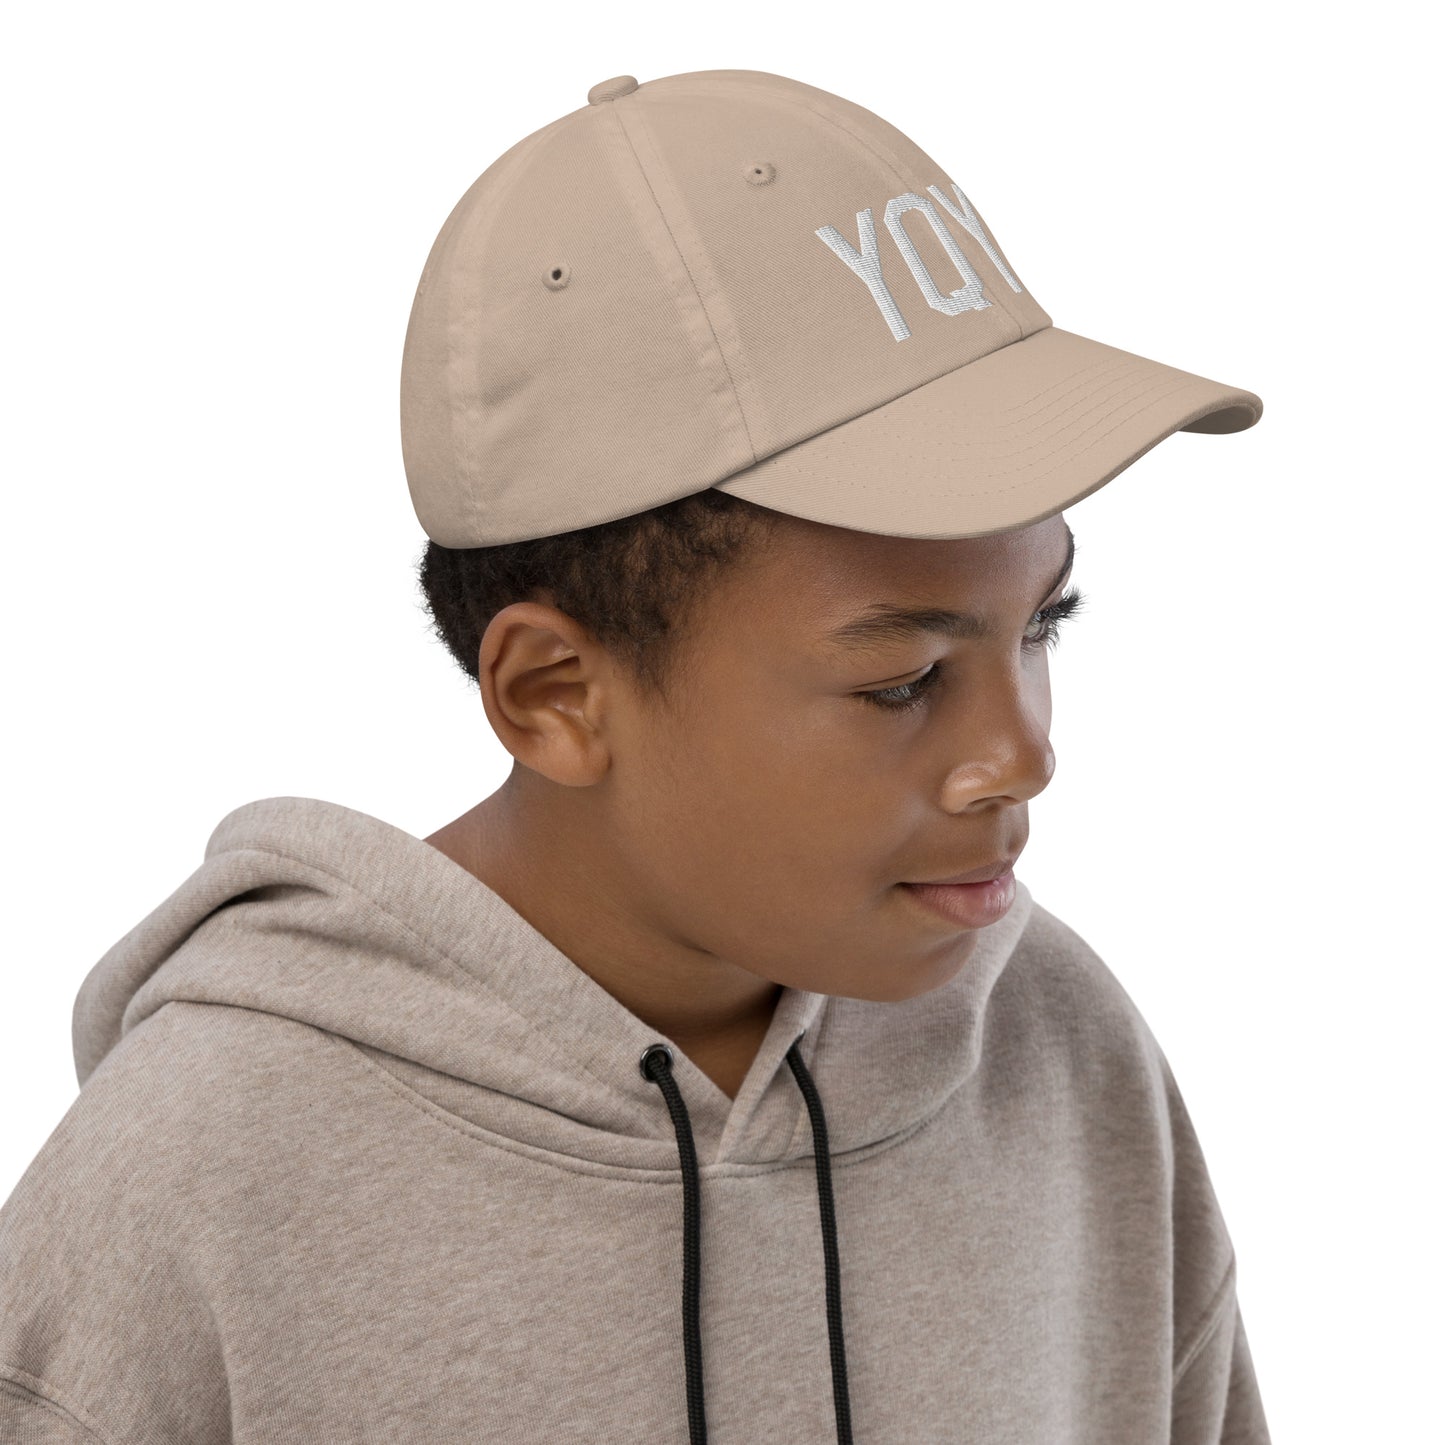 Airport Code Kid's Baseball Cap - White • YQY Sydney • YHM Designs - Image 08